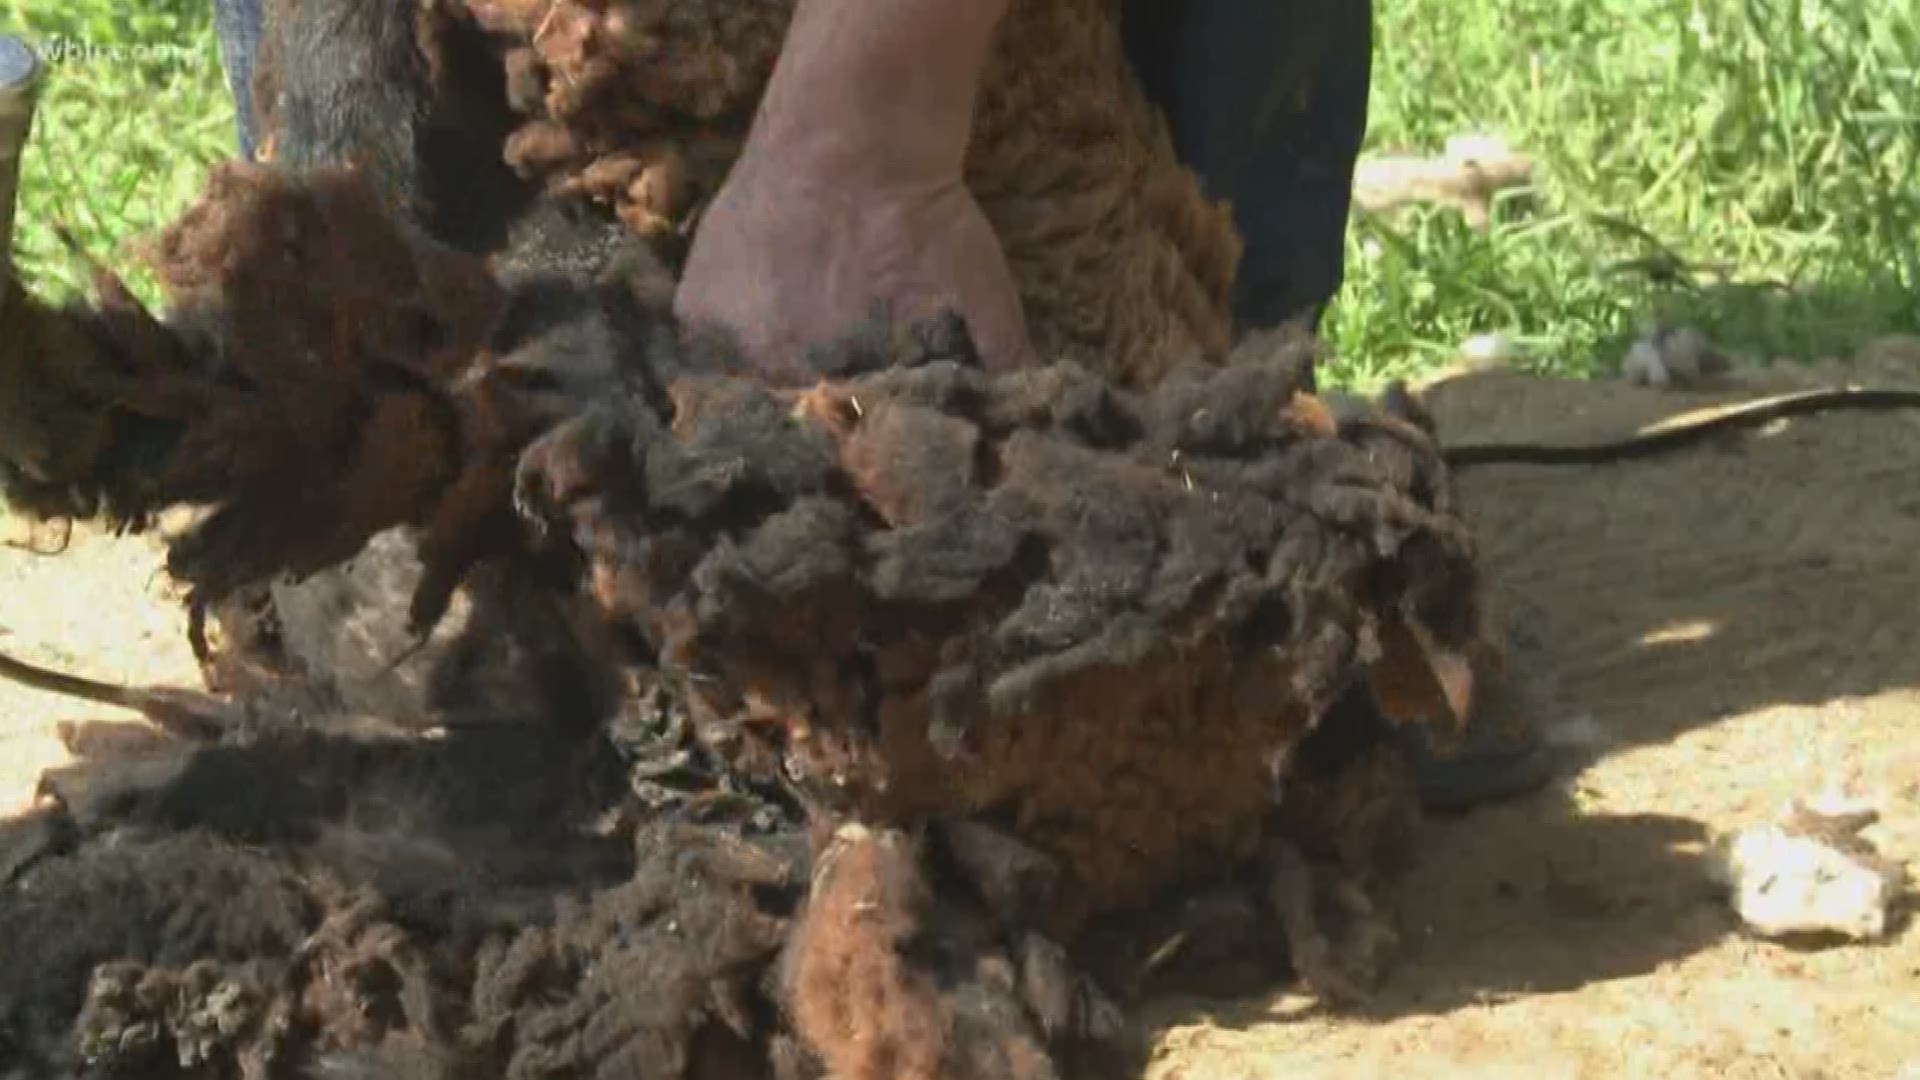 10News reporter Yvonne Thomas is live at the Museum of Appalachia for sheep shearing days!